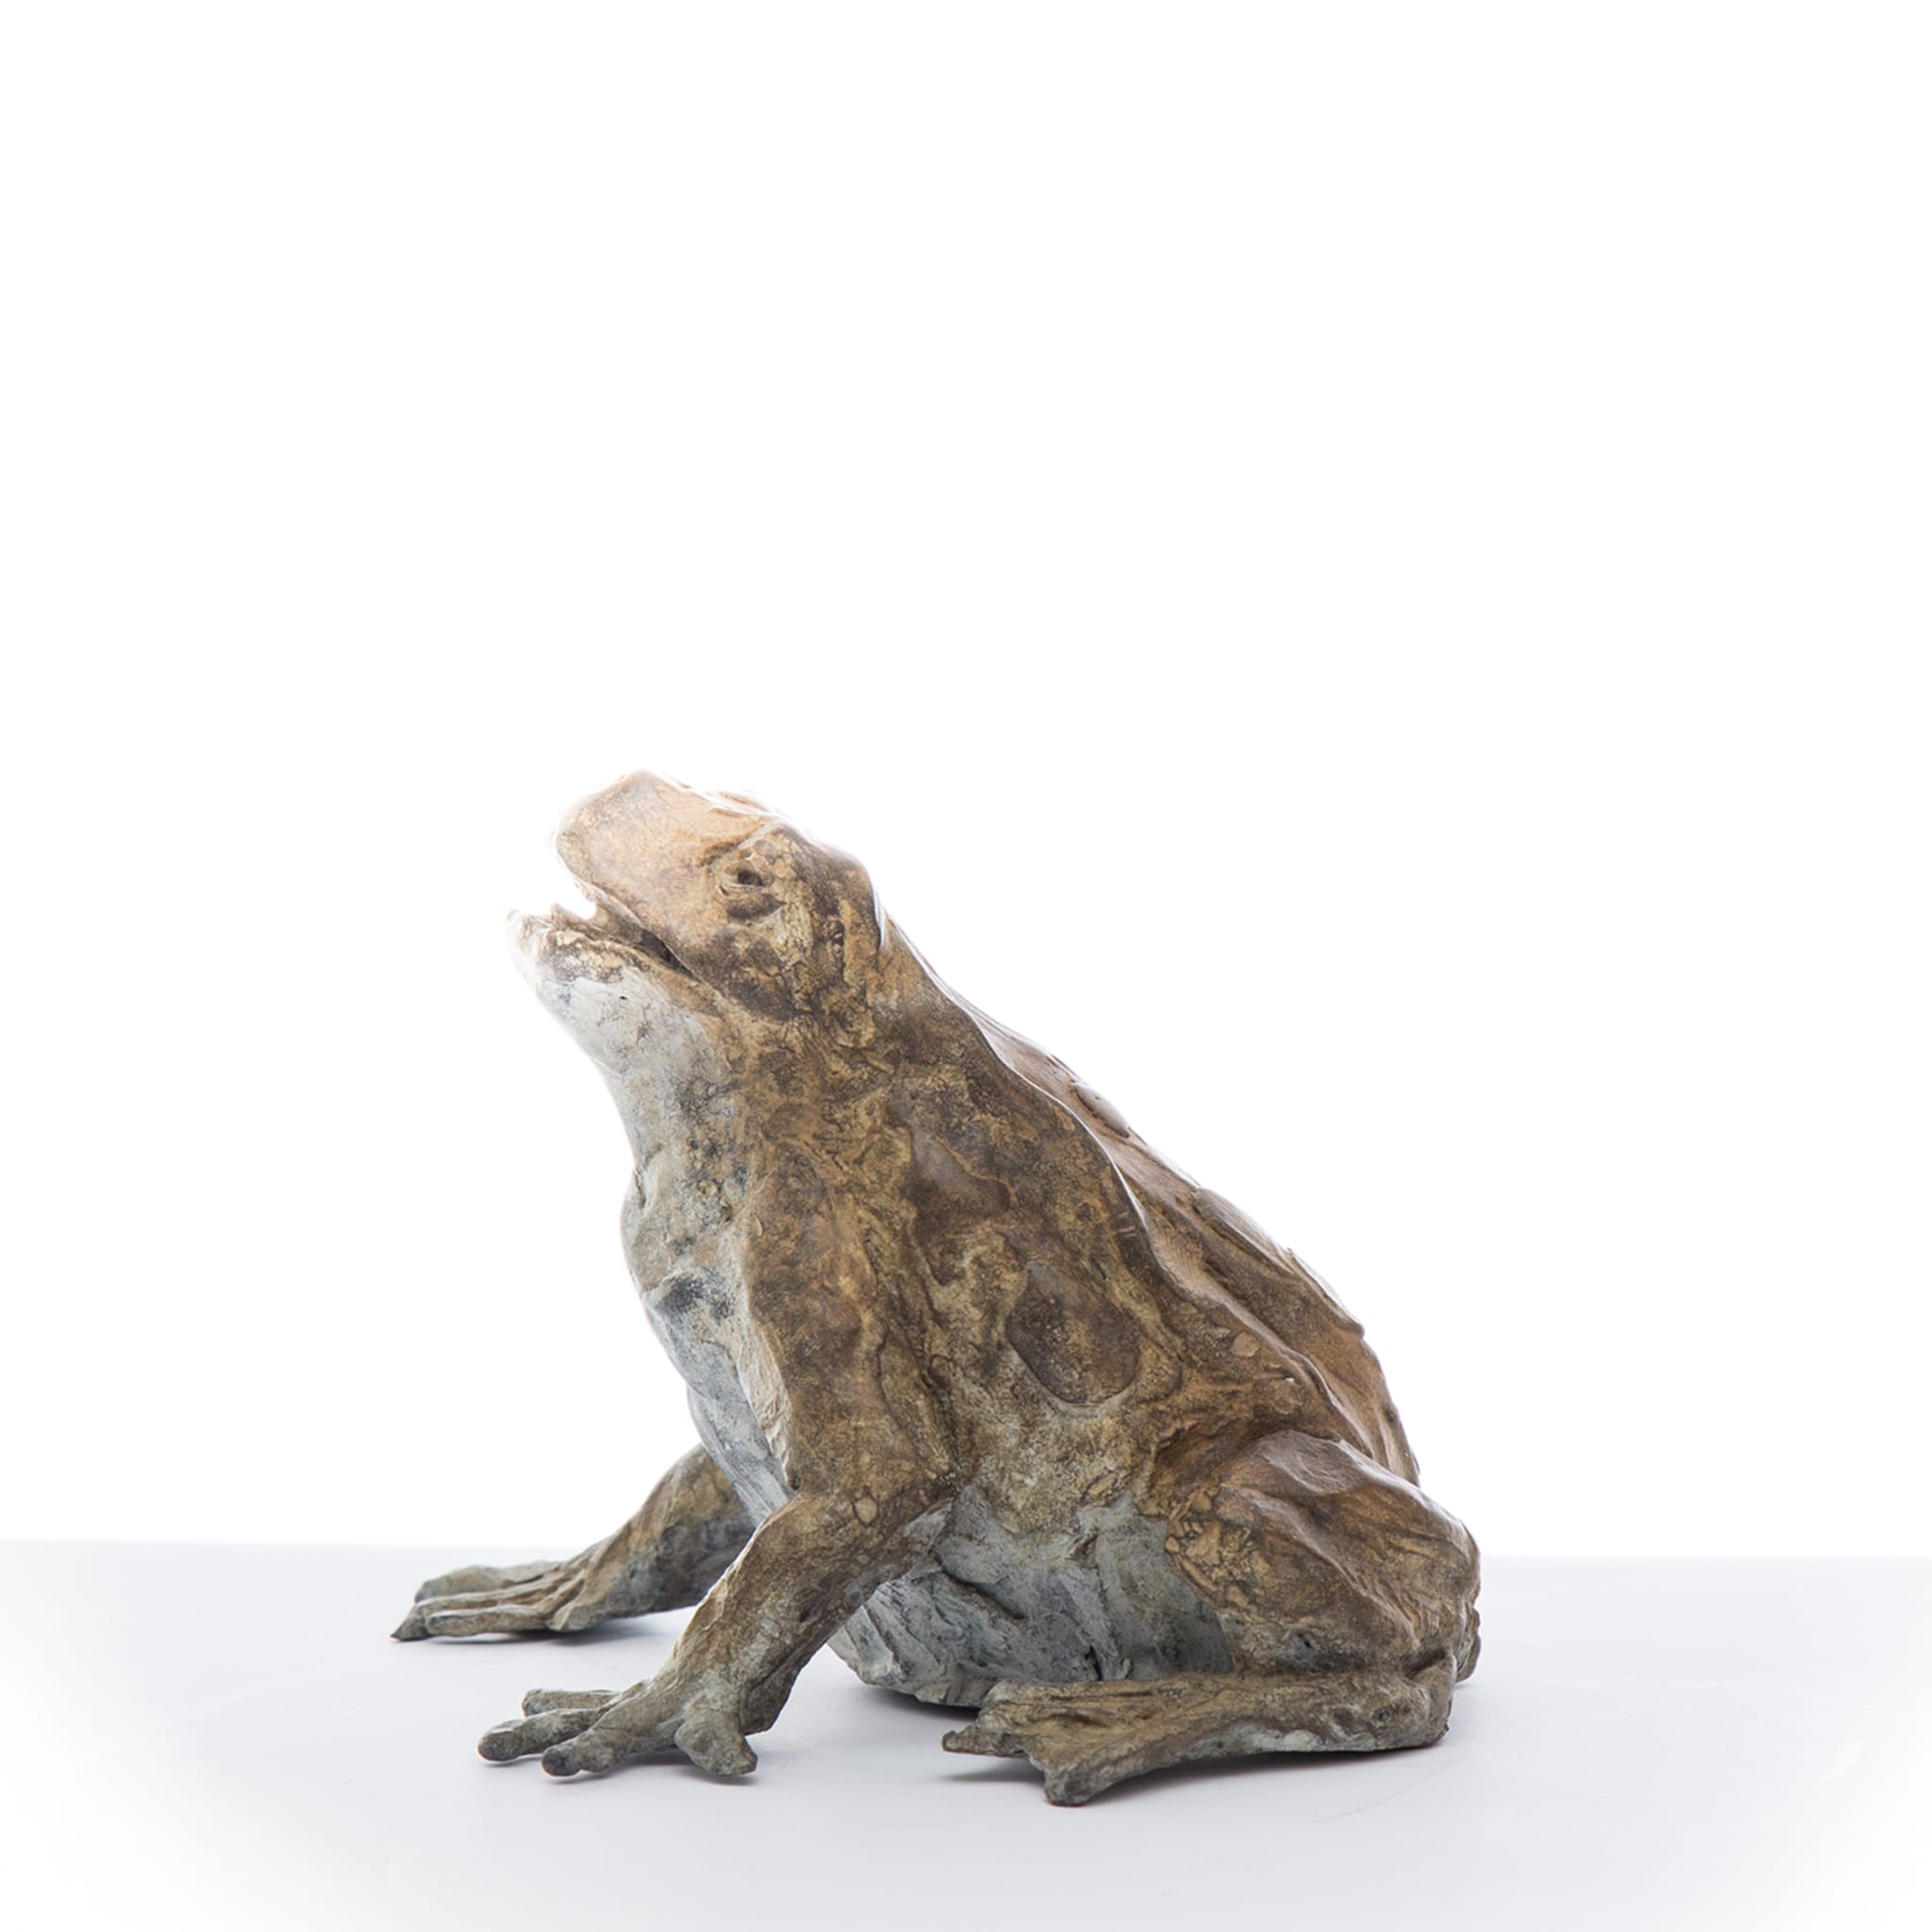 Small Frog Sculpture - Alternative view 2